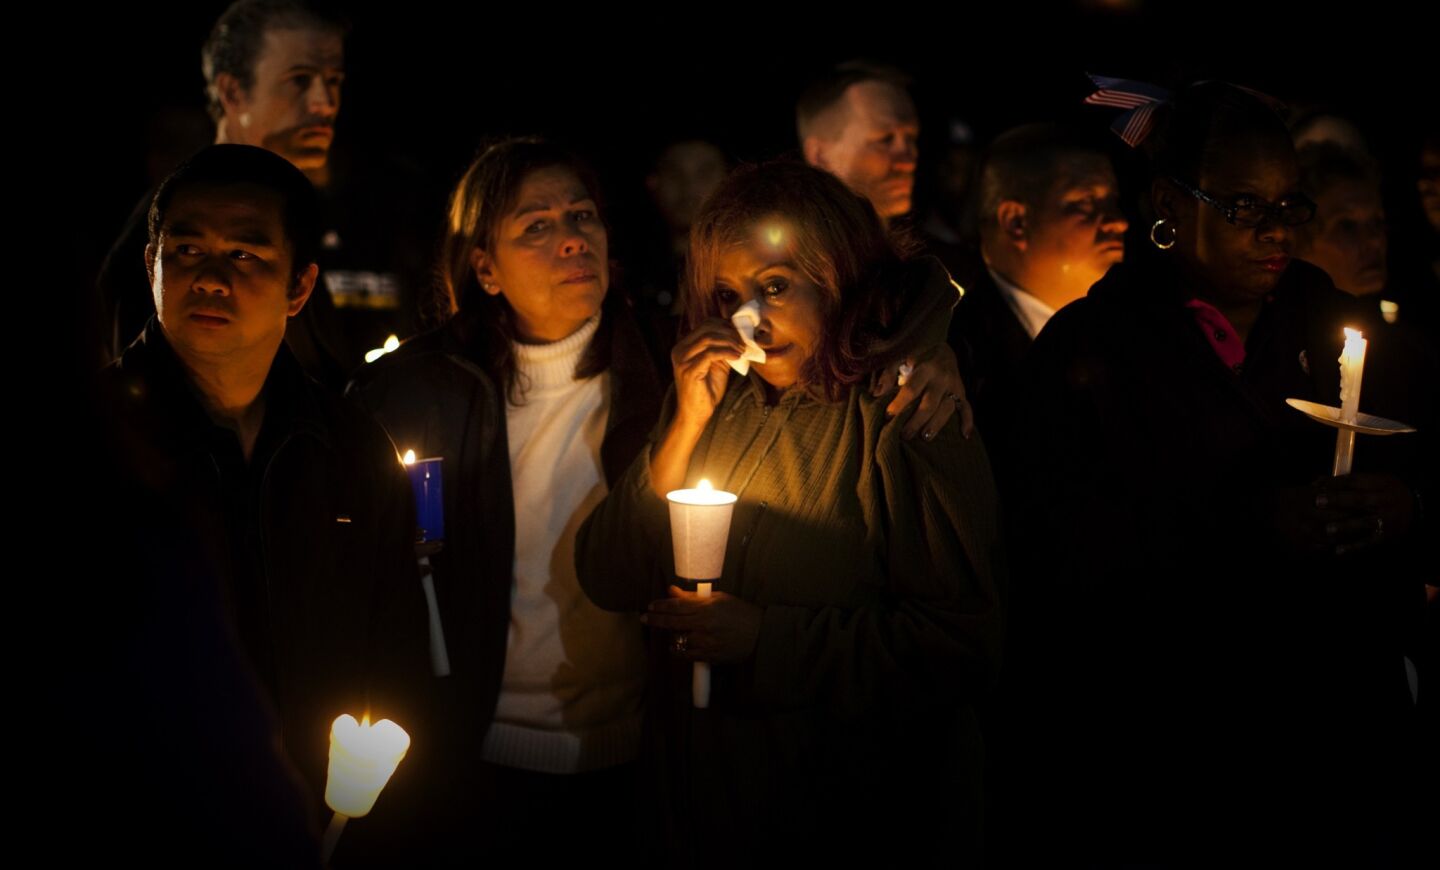 TSA agents Blandina Beltran,left, and Wessane Legesse, right, comfort each other at a candlelight vigil for their co-worker slain TSA agent Gerardo I. Hernandez at Dockweiler State Beach on November 4, 2013 in Los Angeles, California. Beltran and Legesse both work in Terminal 3 at LAX.